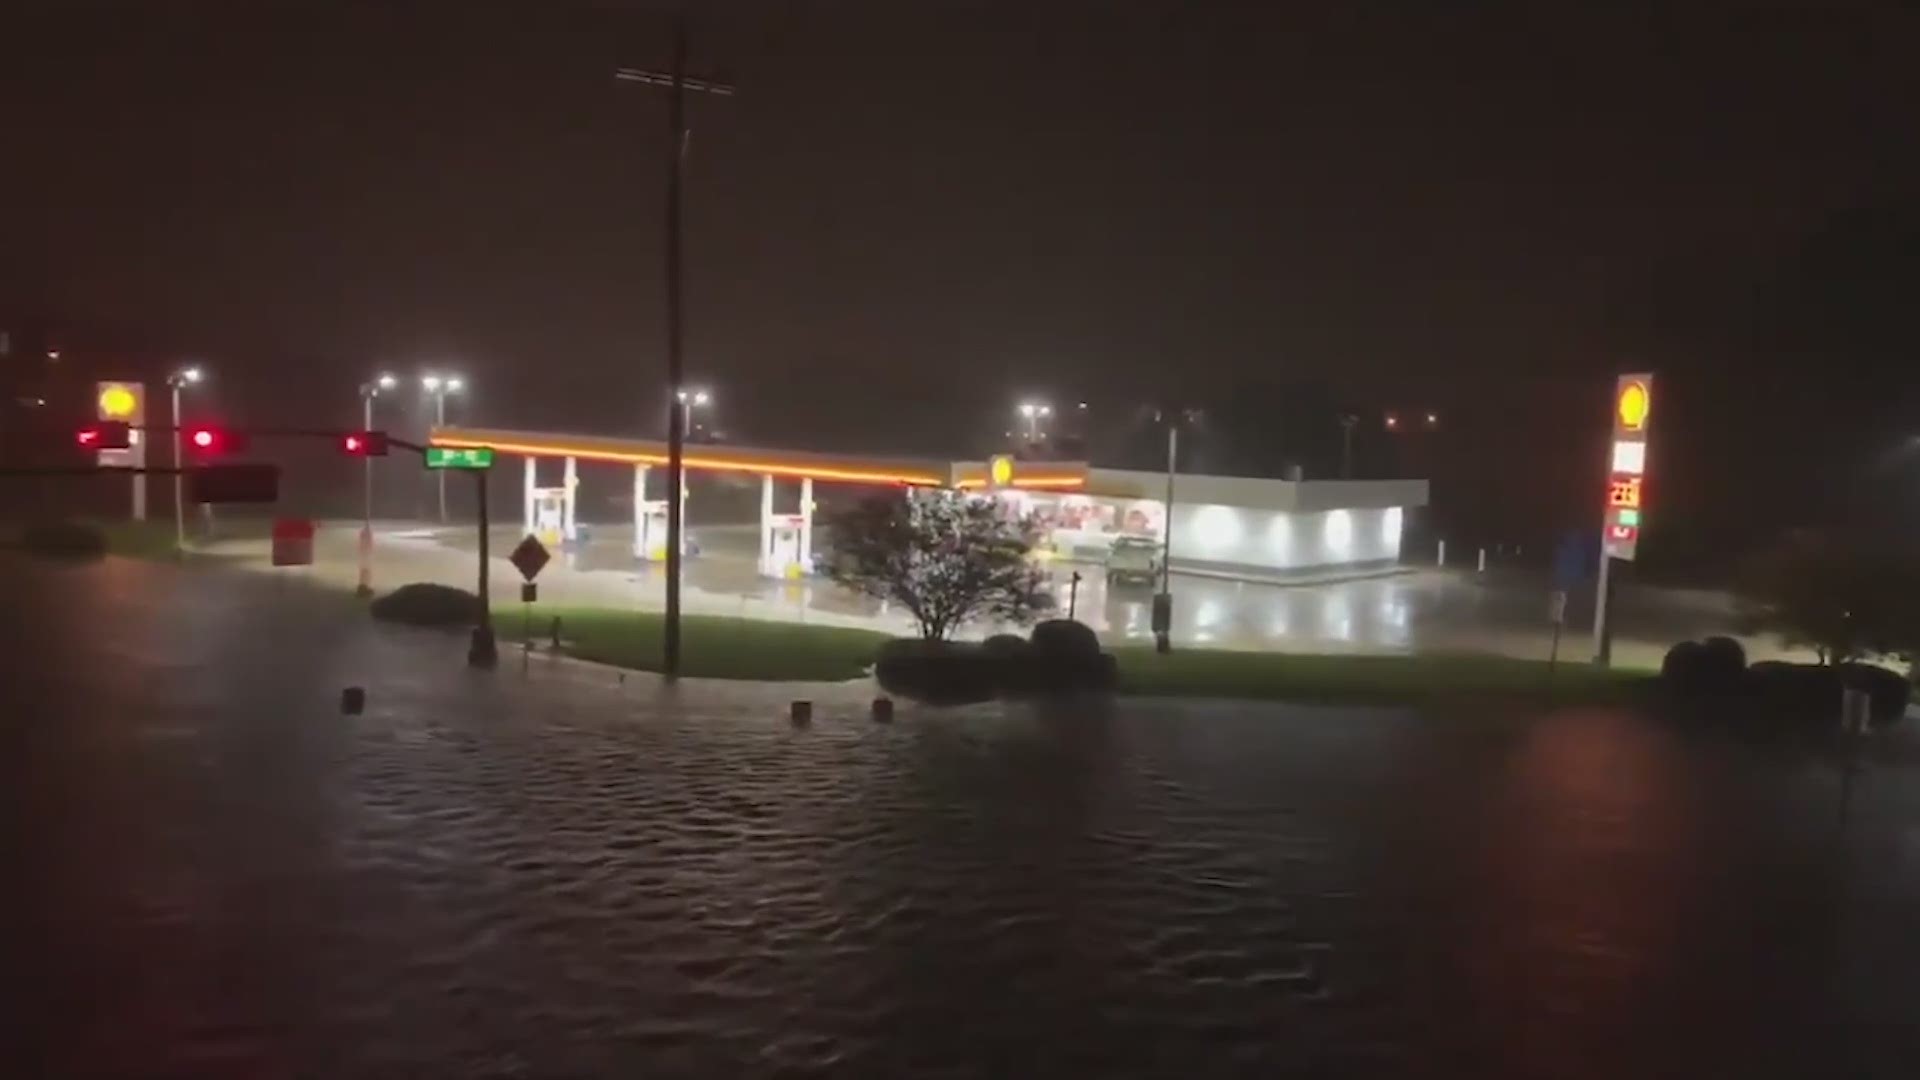 Video shot by 12News and KHOU reporters and photographers the evening of Sept. 18 and morning of Sept. 19, 2019 shows flooding and rain caused by Imelda.